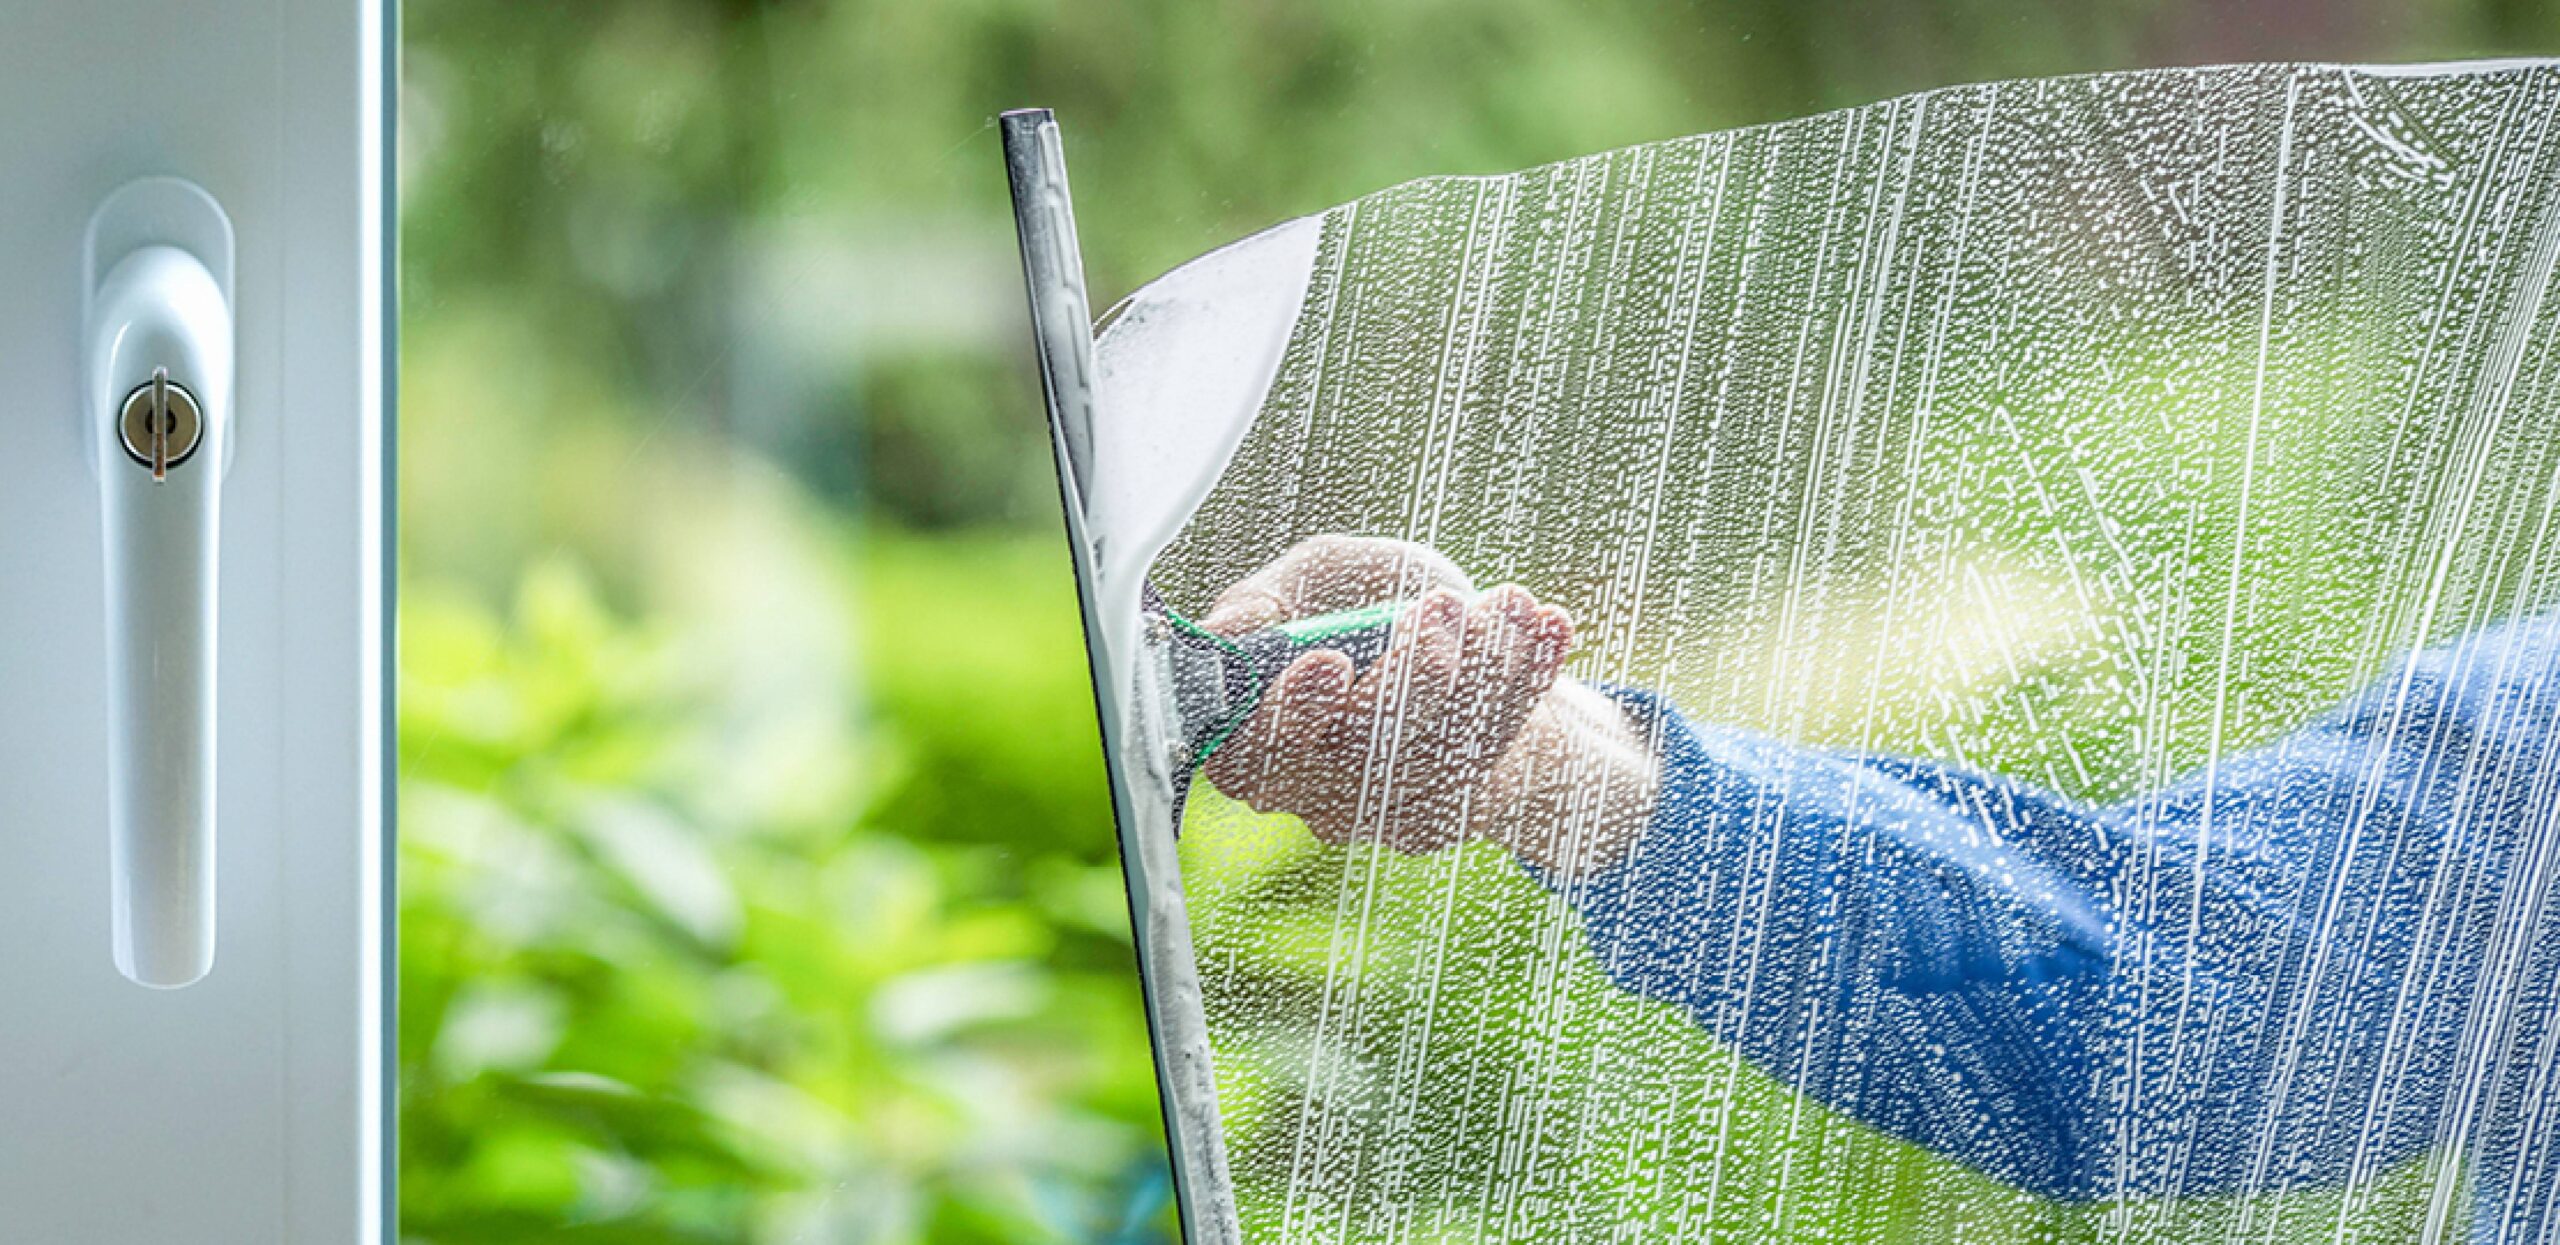 A professional window washer uses a squeegie to precisely clean a modern window, with a lush green yard in the background.